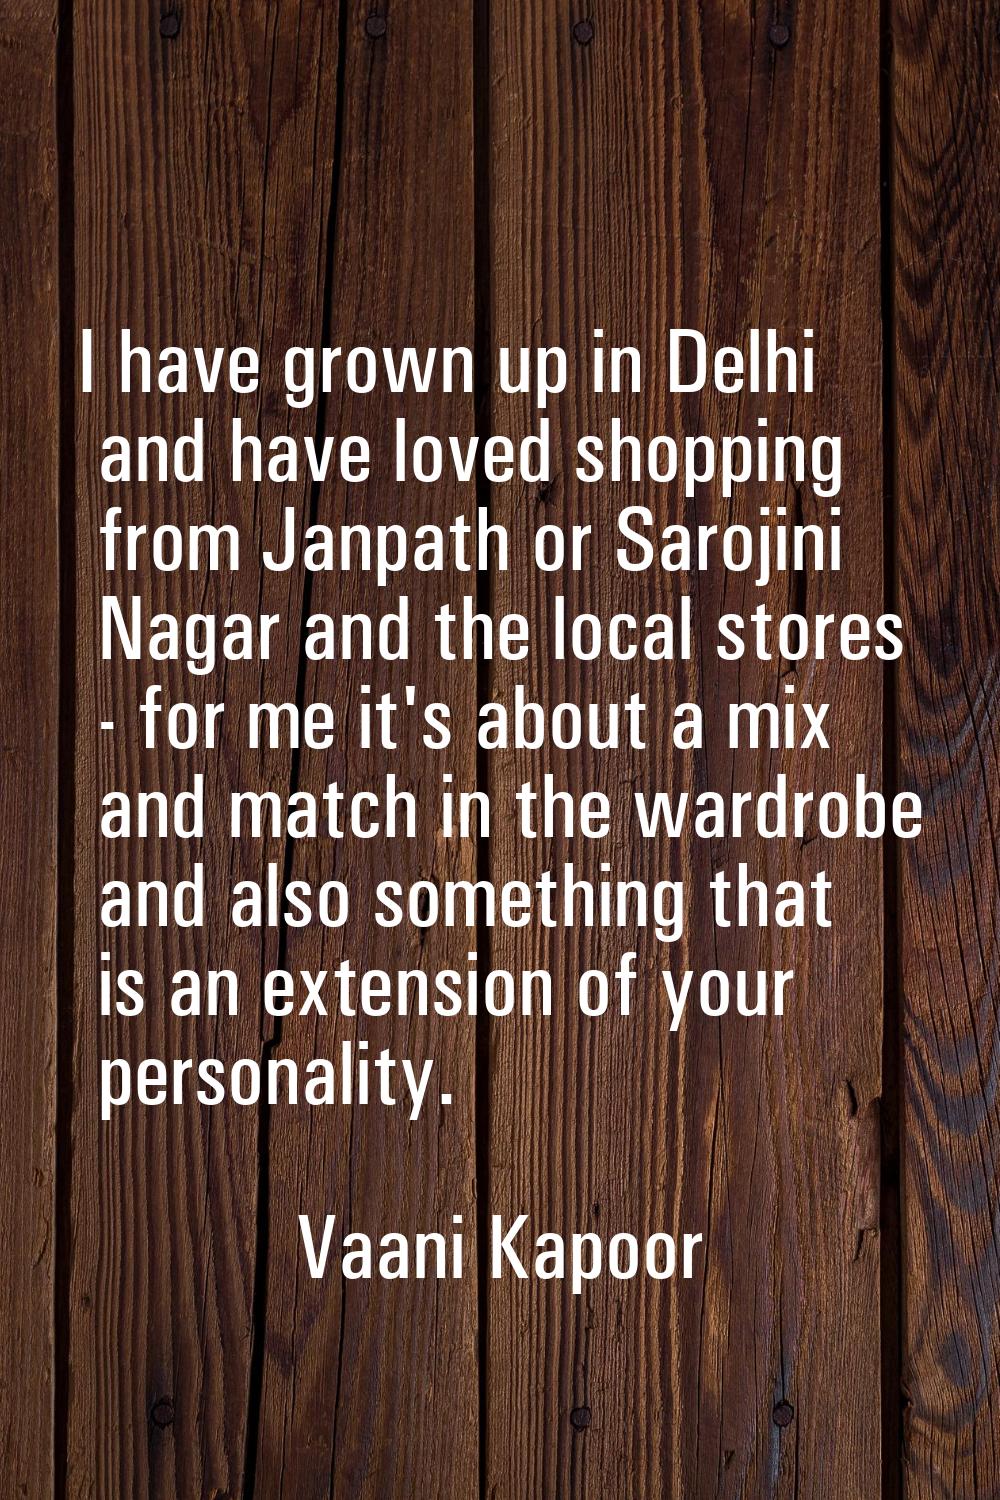 I have grown up in Delhi and have loved shopping from Janpath or Sarojini Nagar and the local store